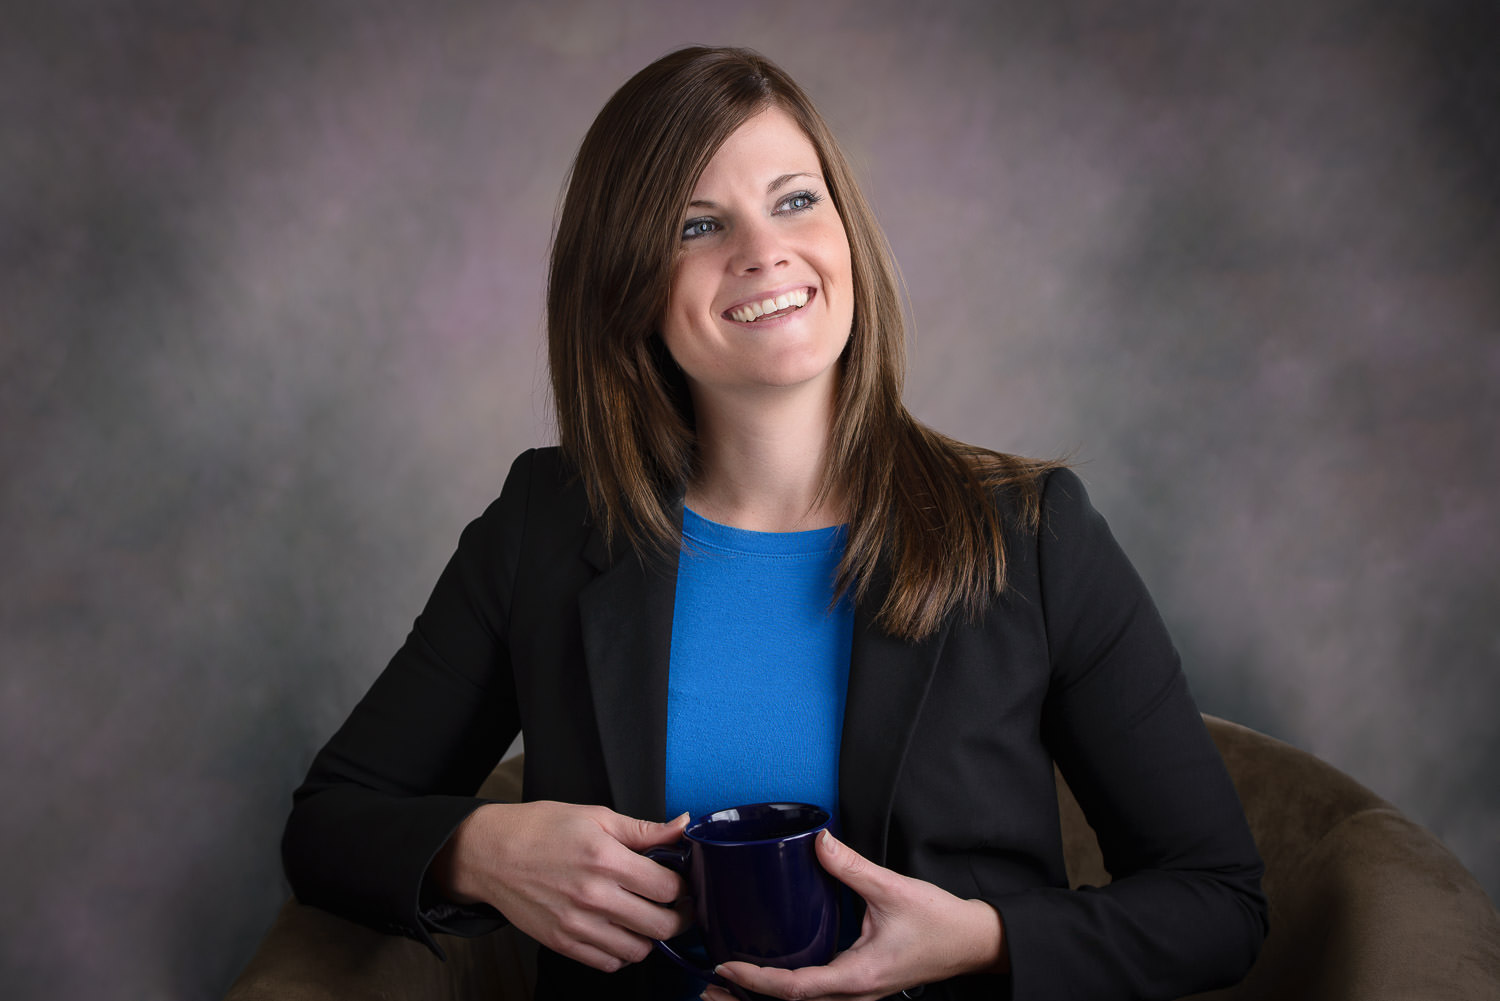 Marketing image of a business woman on a gray and purple background